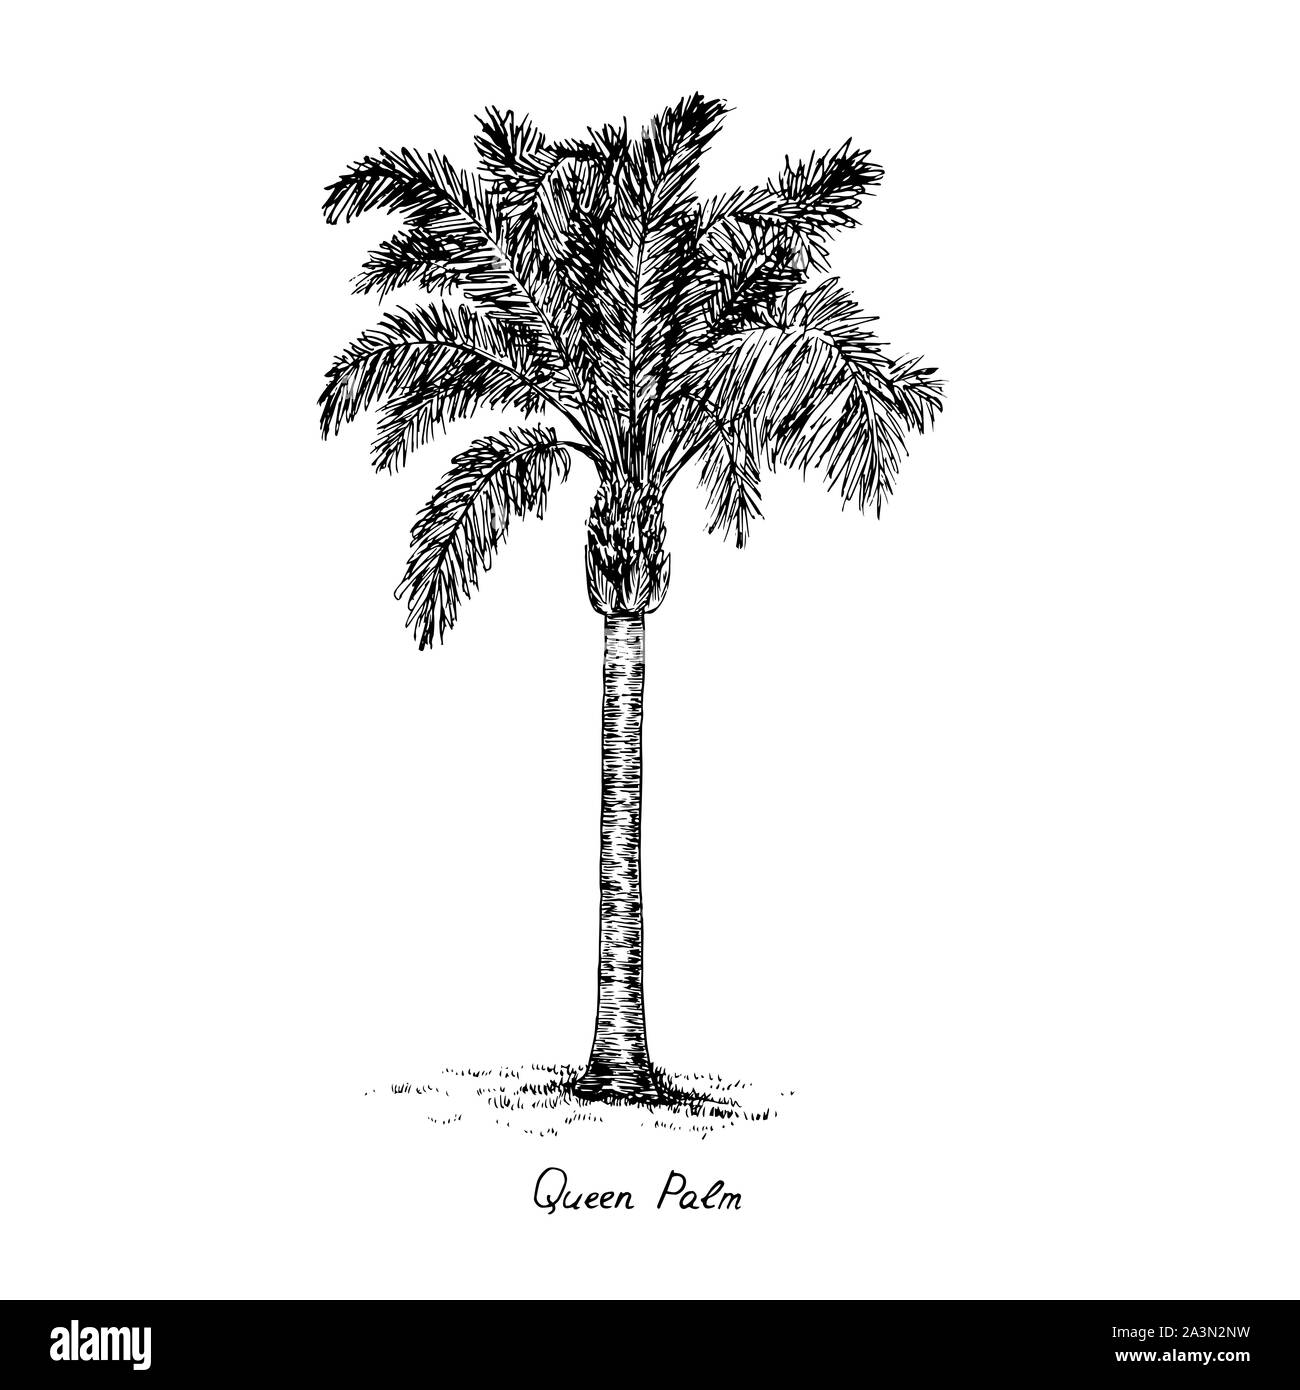 Syagrus romanzoffiana, the queen or cocos palm tree silhouette, hand drawn gravure style, sketch illustration with inscription Stock Photo